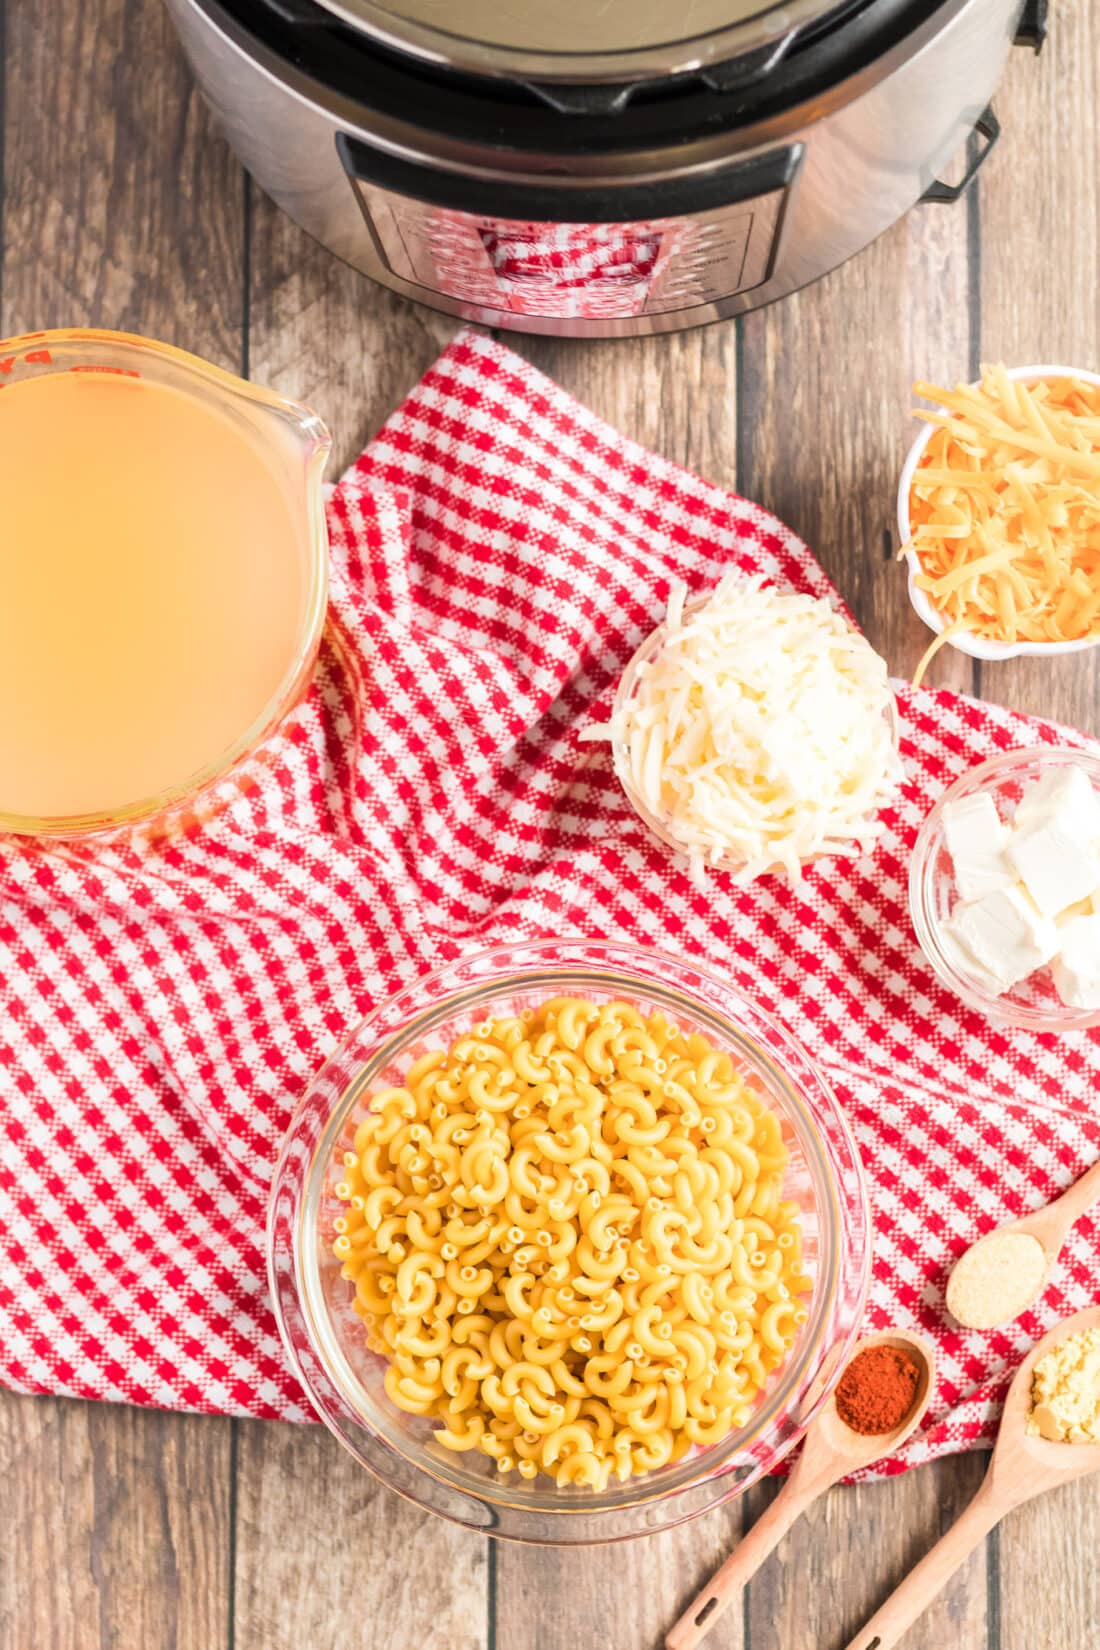 Ingredients for Instant Pot Mac and Cheese
